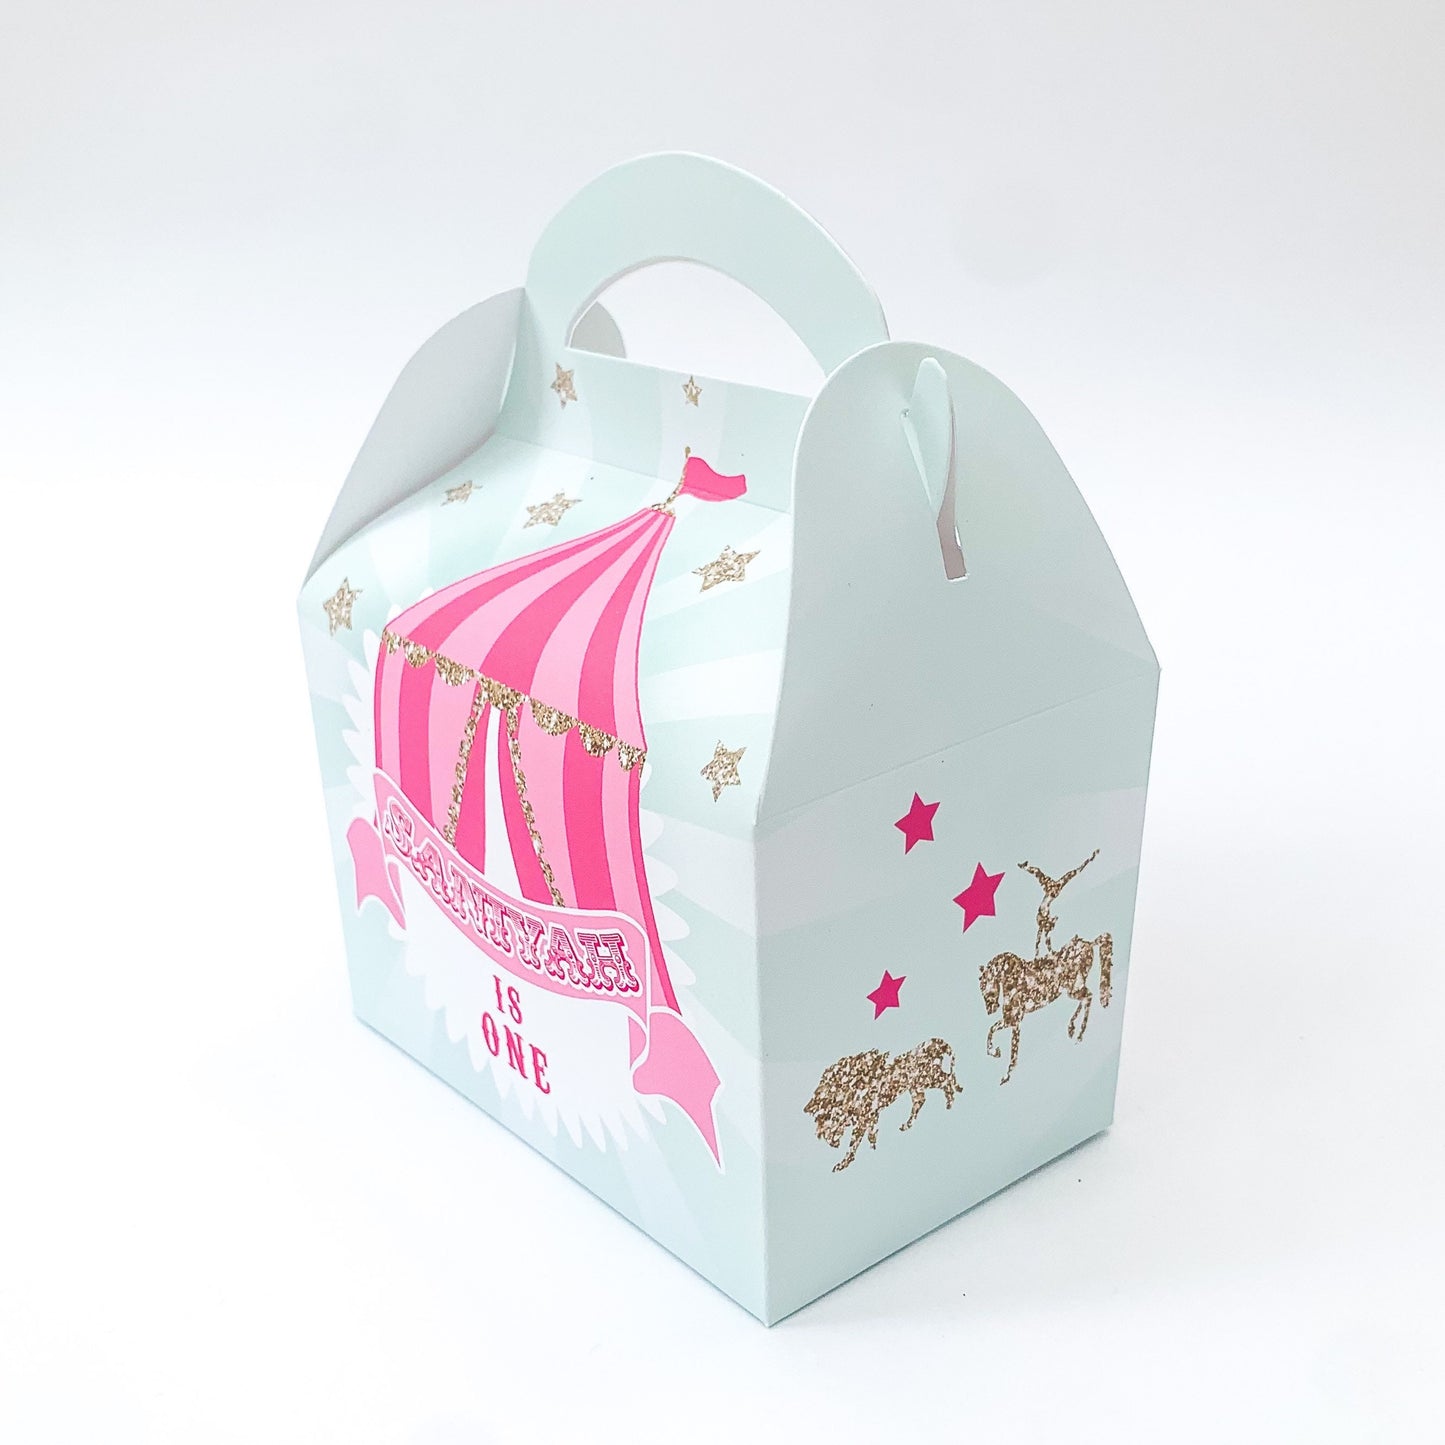 CIRCUS Carnival Personalised Children’s Party Box Gift Bag Favour